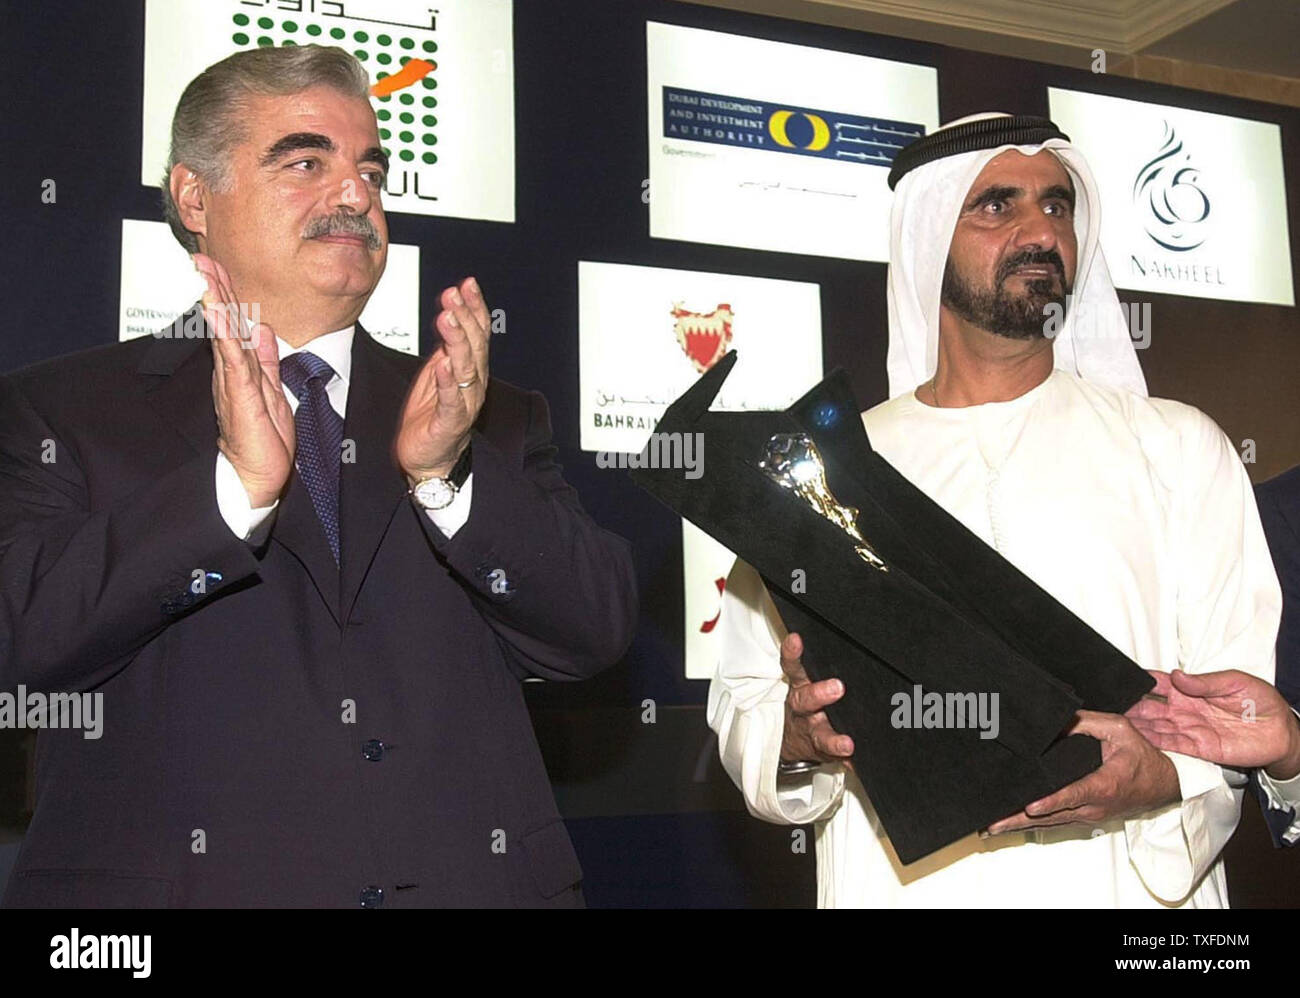 Lebanese Prime Minister Rafic Hariri, left, honors Crown Prince of Dubai and UAE Defense Minister Sheikh Mohammed Bin Rashid al Maktoum (right) and offers him an award at the opening session of the 10th  Arab Investment and Capital markets Conference in Beirut Thursday morning June 24, 2004. The two-day conference attracted nearly 1,000 participants, including former Malaysian Prime Minister Mahathir Mohamad.  (UPI Photo/Mohammed Tawil) Stock Photo